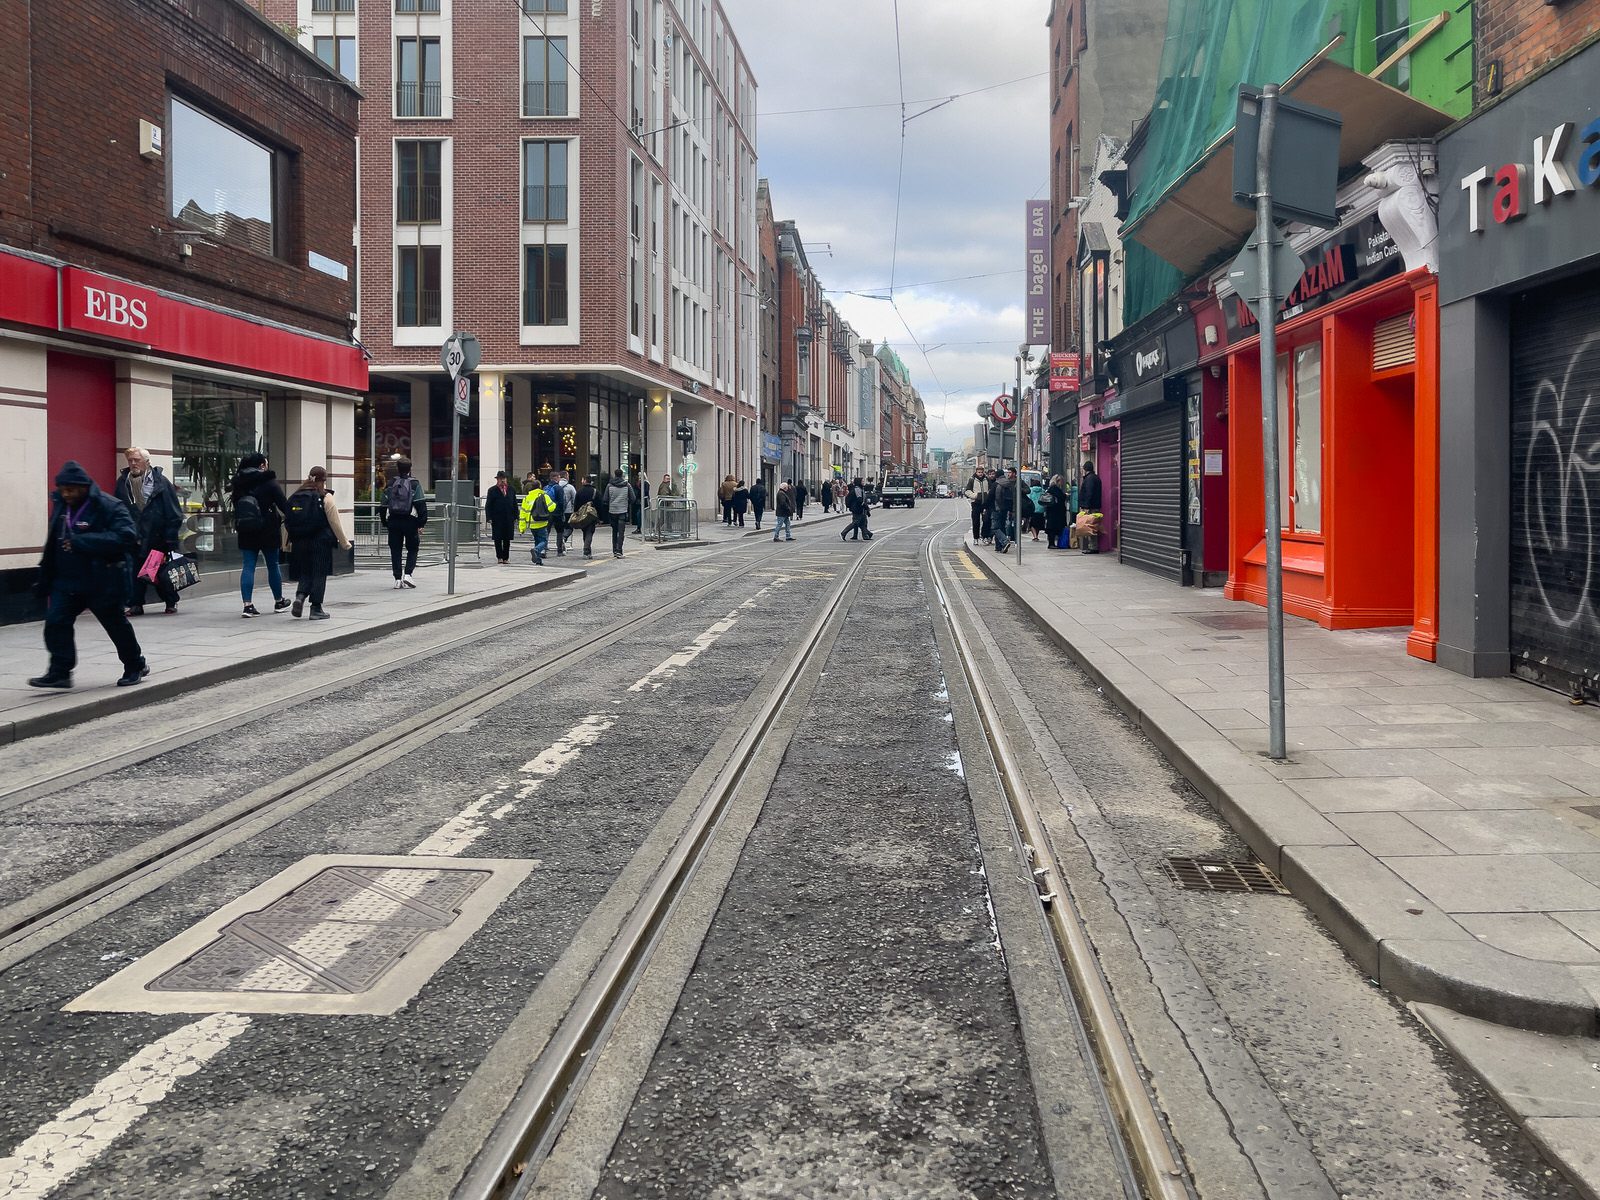 DUBLIN CITY CENTRE [THE DAY AFTER THE RIOT AND LITTLE TO SEE]-225275-1